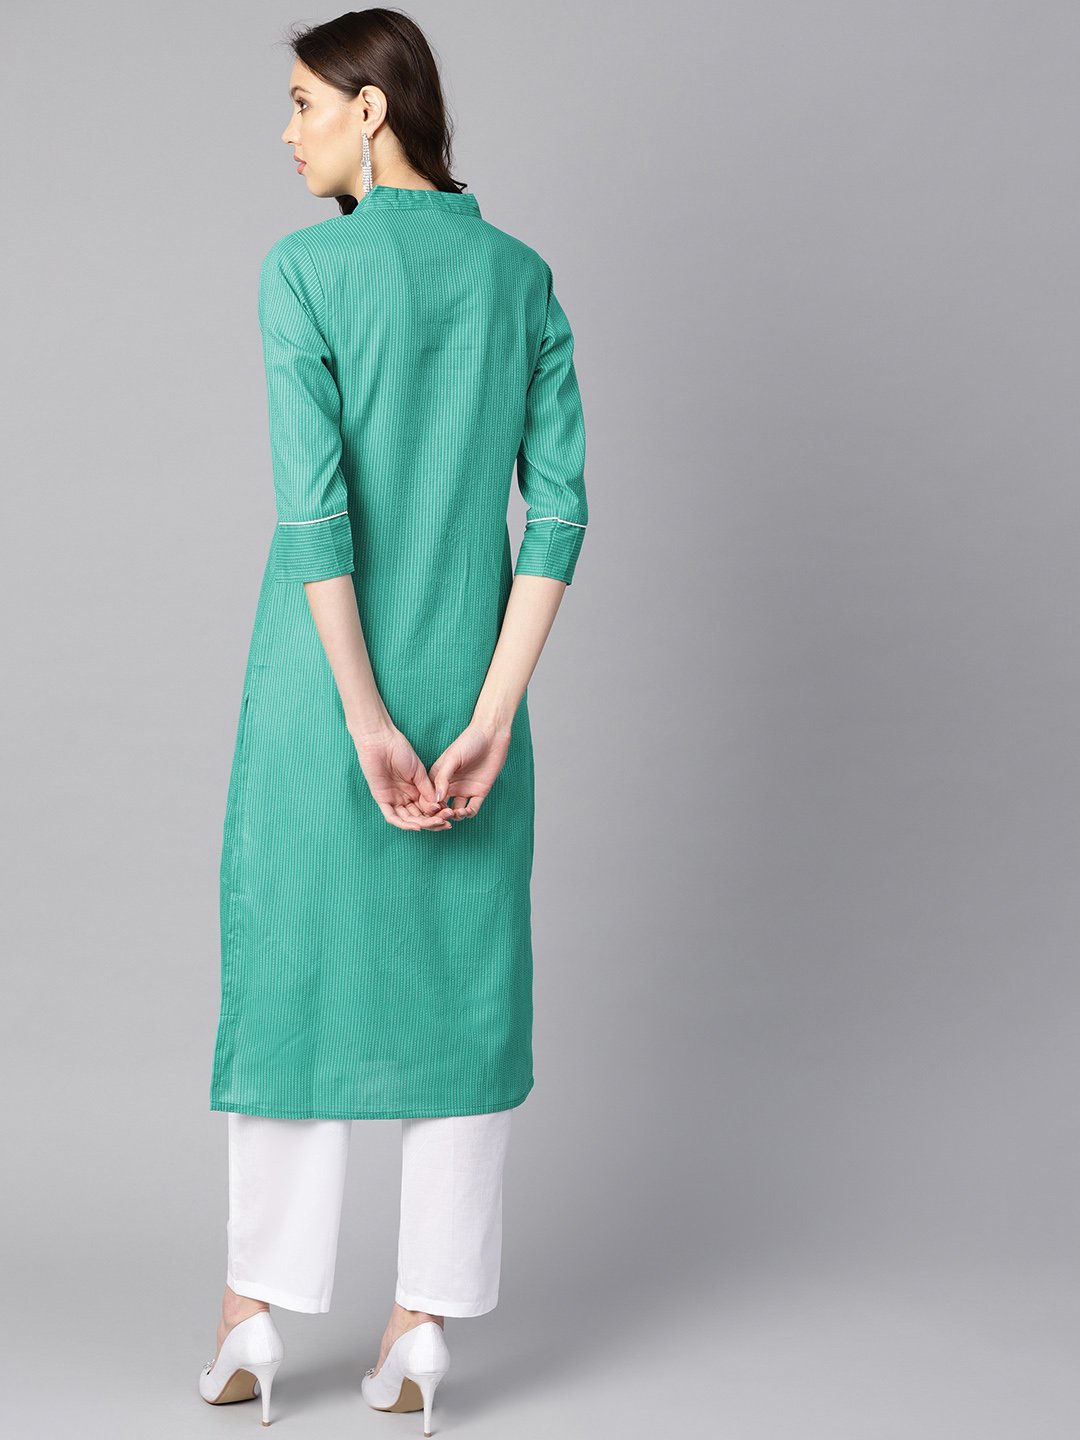 Women's Solid Green Tagai-Work Straight Kurta With Detailing On The Cuff With White Straight Pants - Nayo Clothing